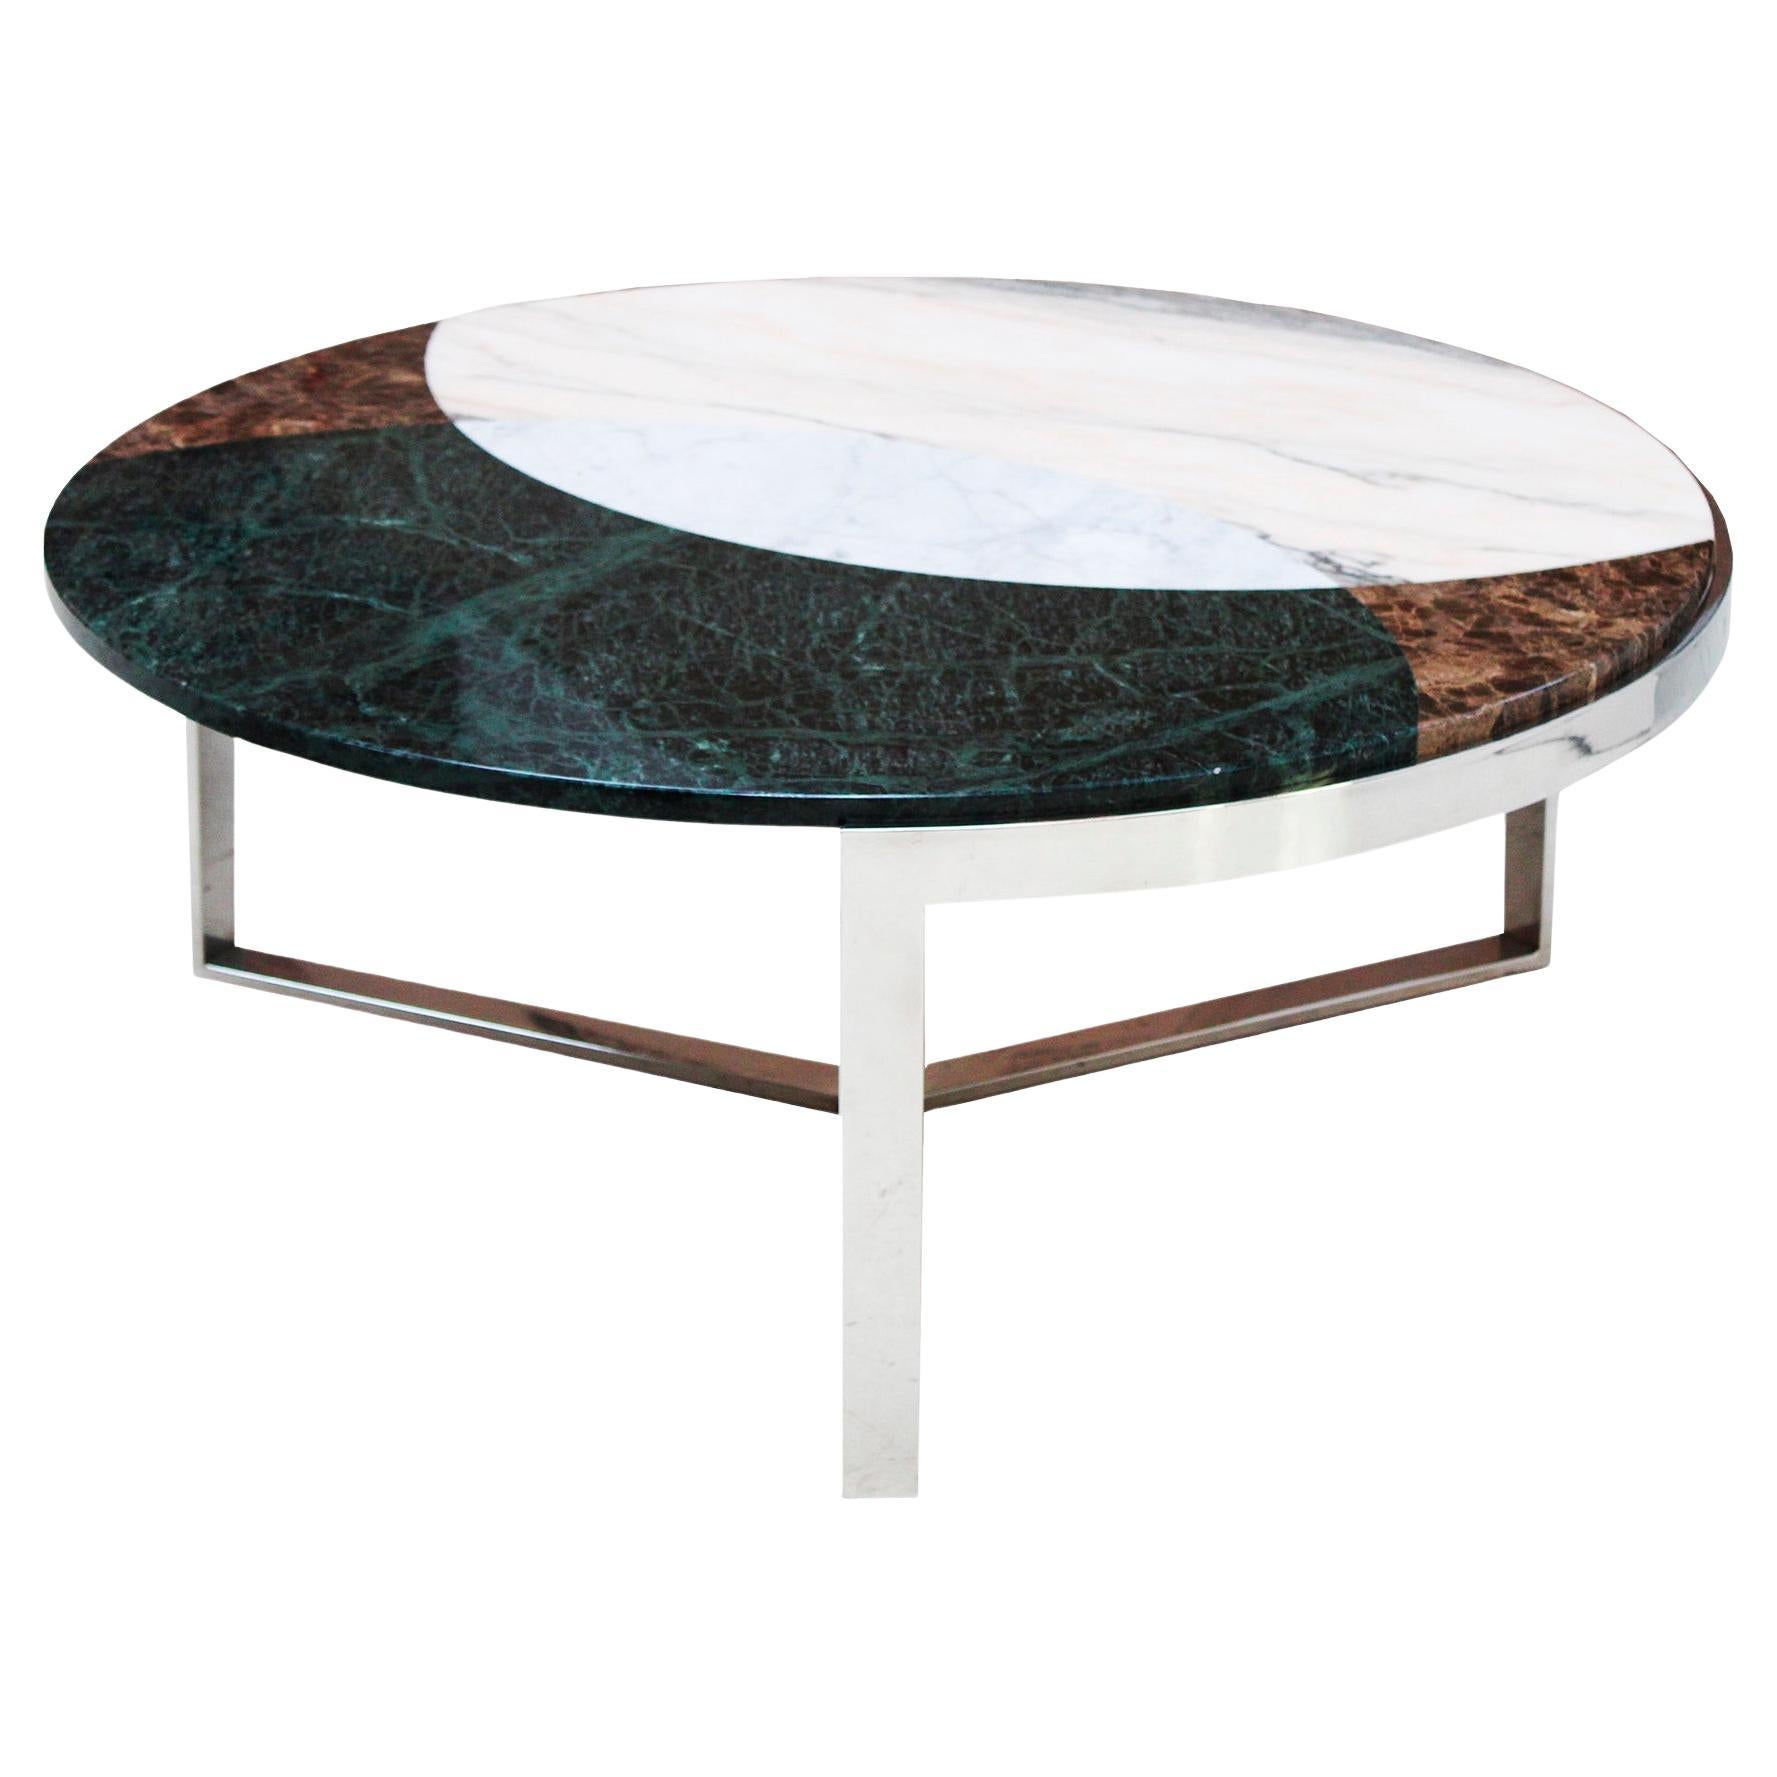 Round Coffee Table With Marquetery Work Of Marble and Stell, France 1970 For Sale